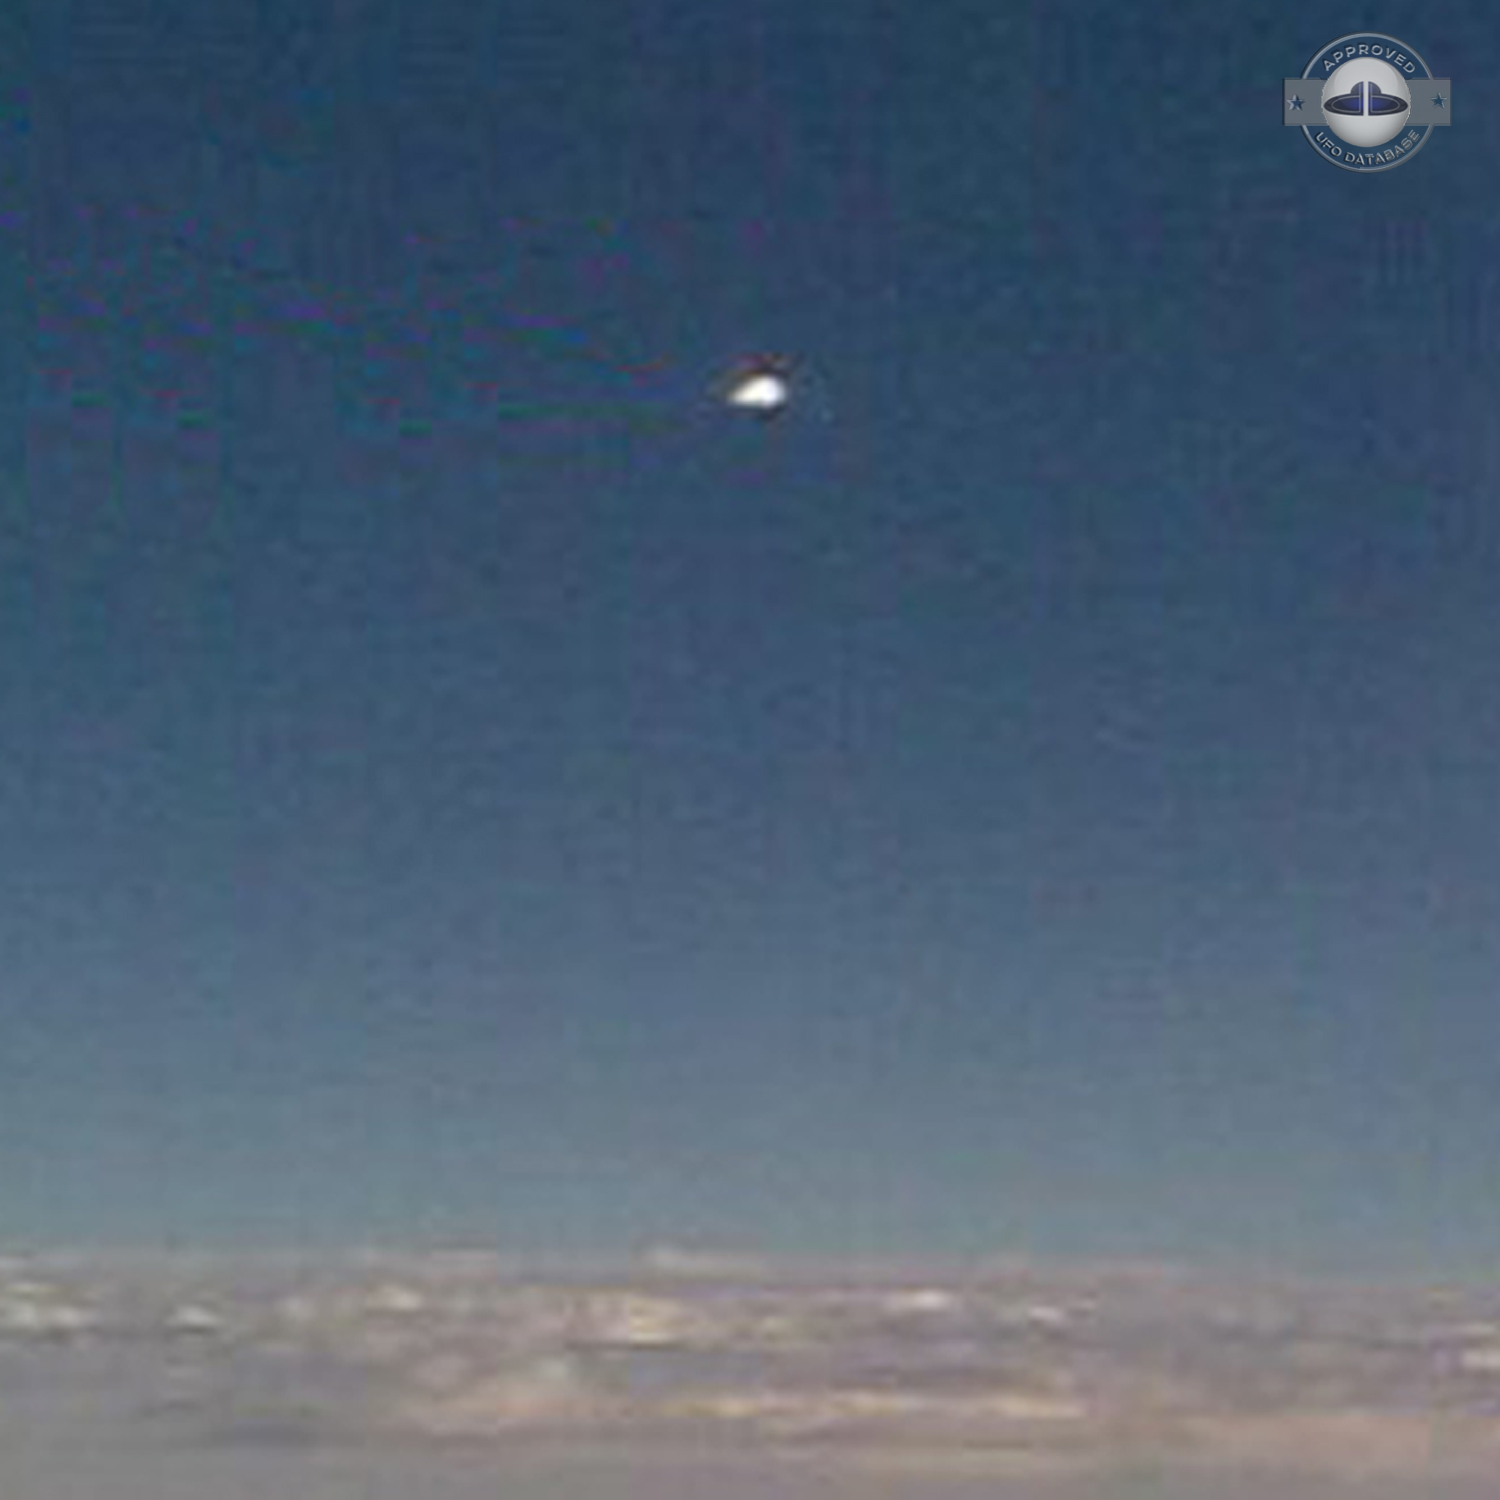 UFO seen over India between New Delhi to Guwahati | UFO picture 2008 UFO Picture #195-4